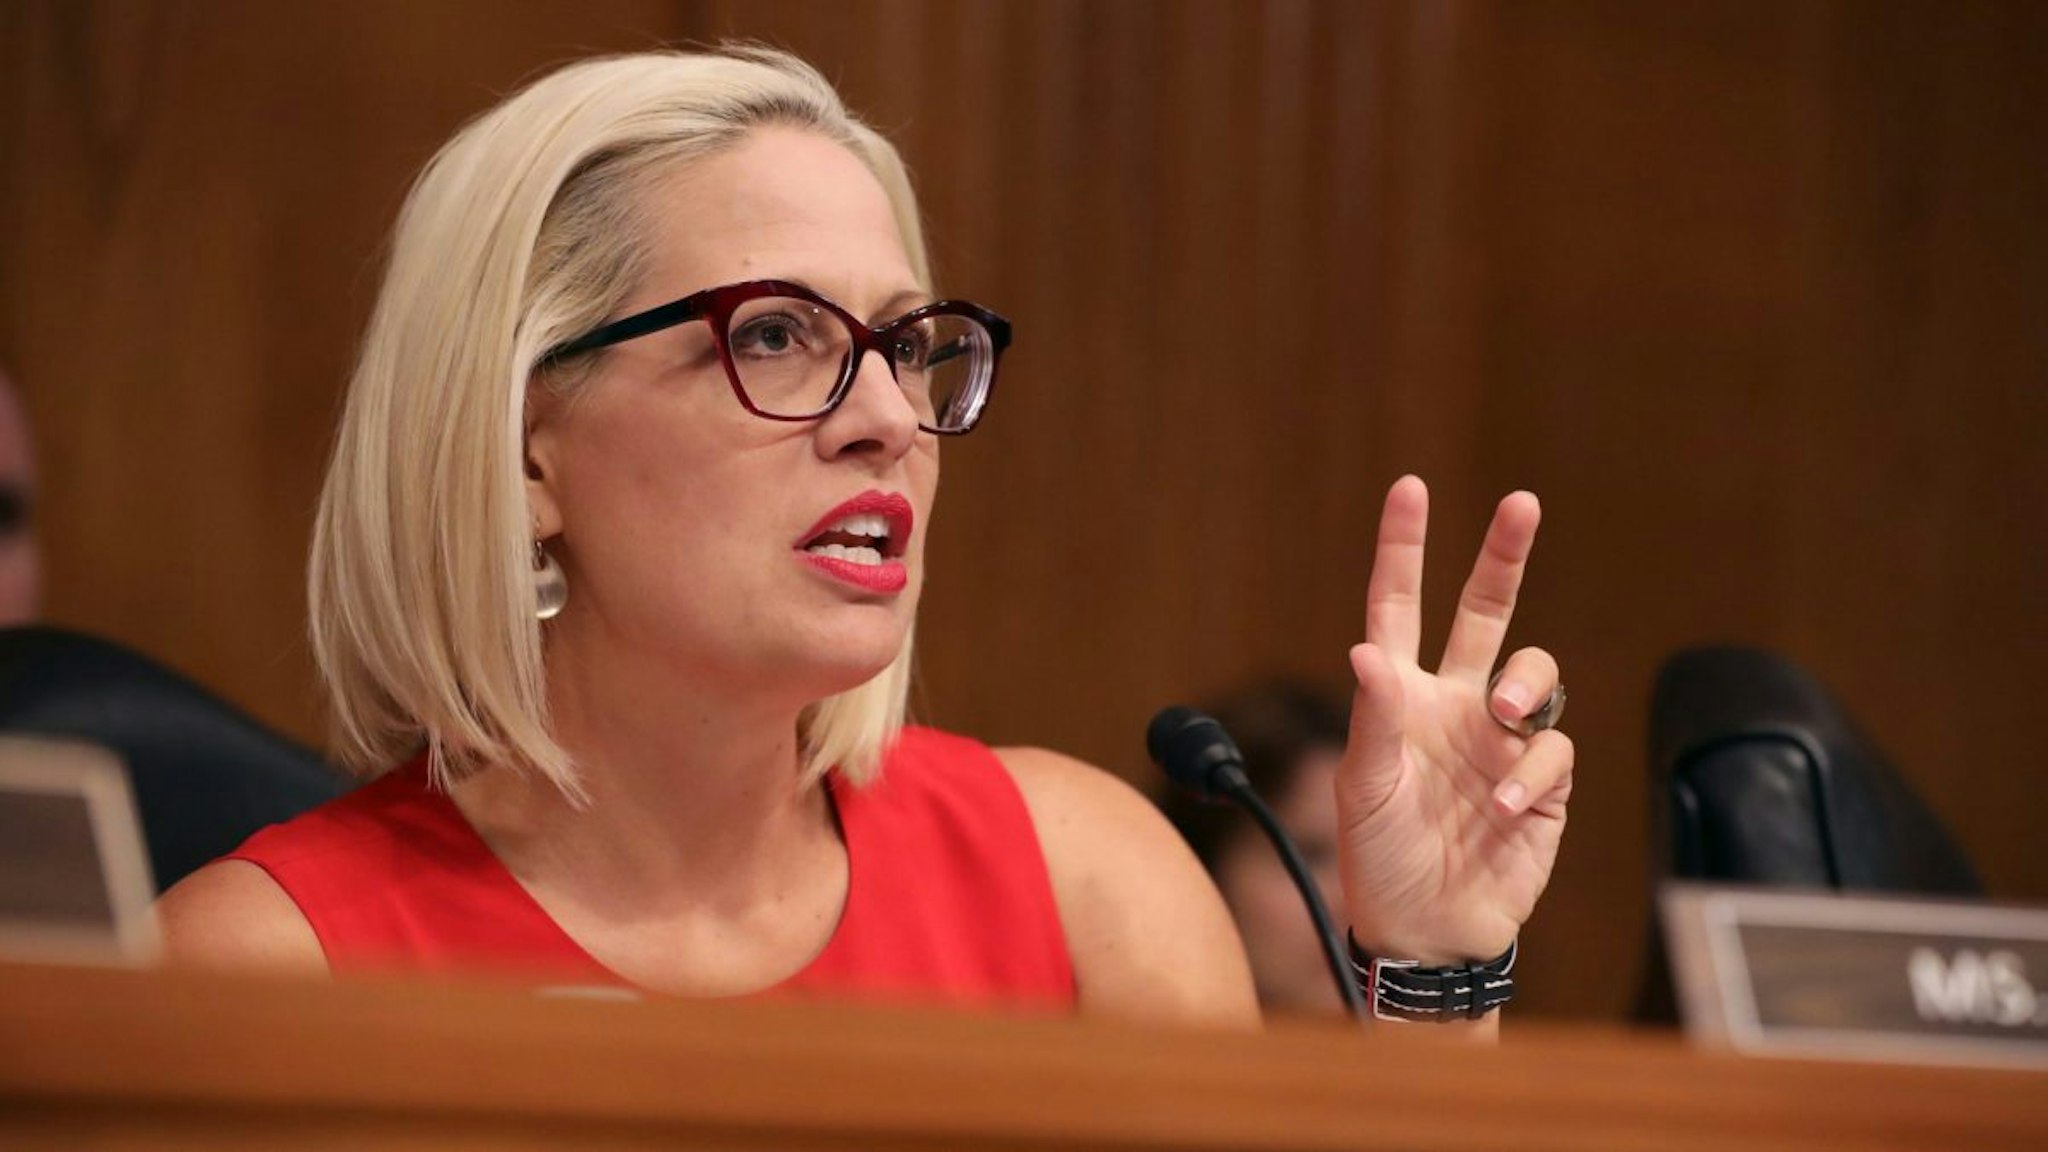 Senate Aviation and Space Subcommittee ranking member Sen. Kyrsten Sinema questions witnesses during a hearing in the Dirksen Senate Office Building on Capitol Hill on May 14, 2019 in Washington, DC.